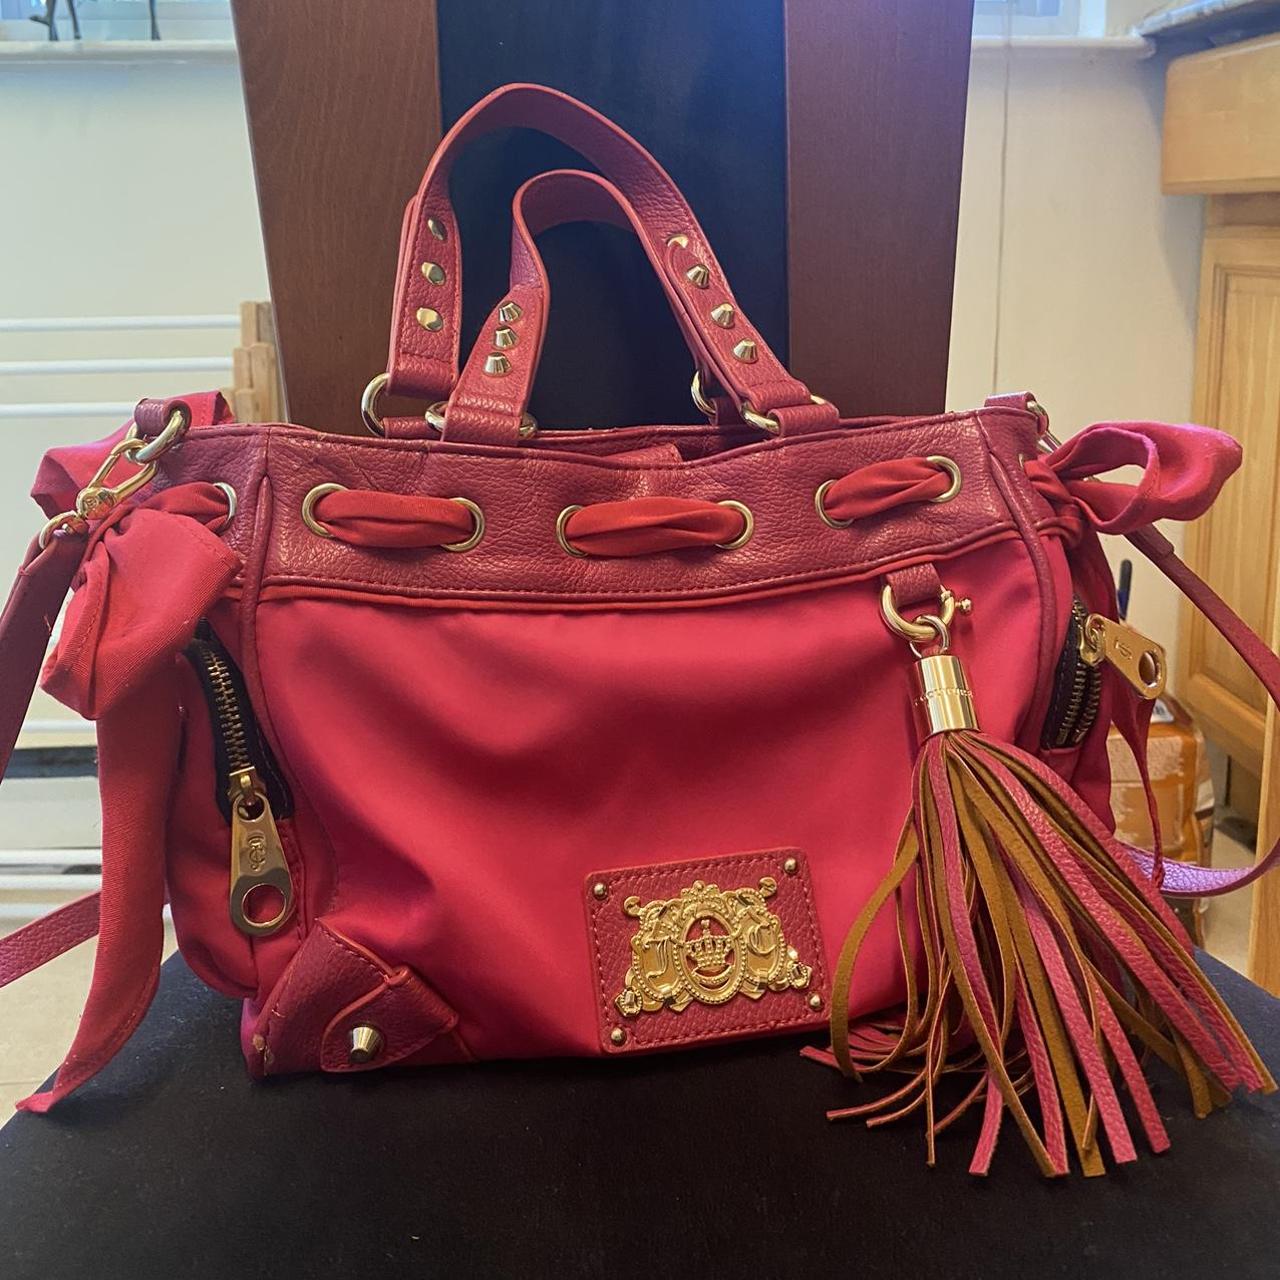 Juicy Couture Daydreamer purse 💖💛 ♡. ˚ ୨୧ ˚ .♡... - Depop